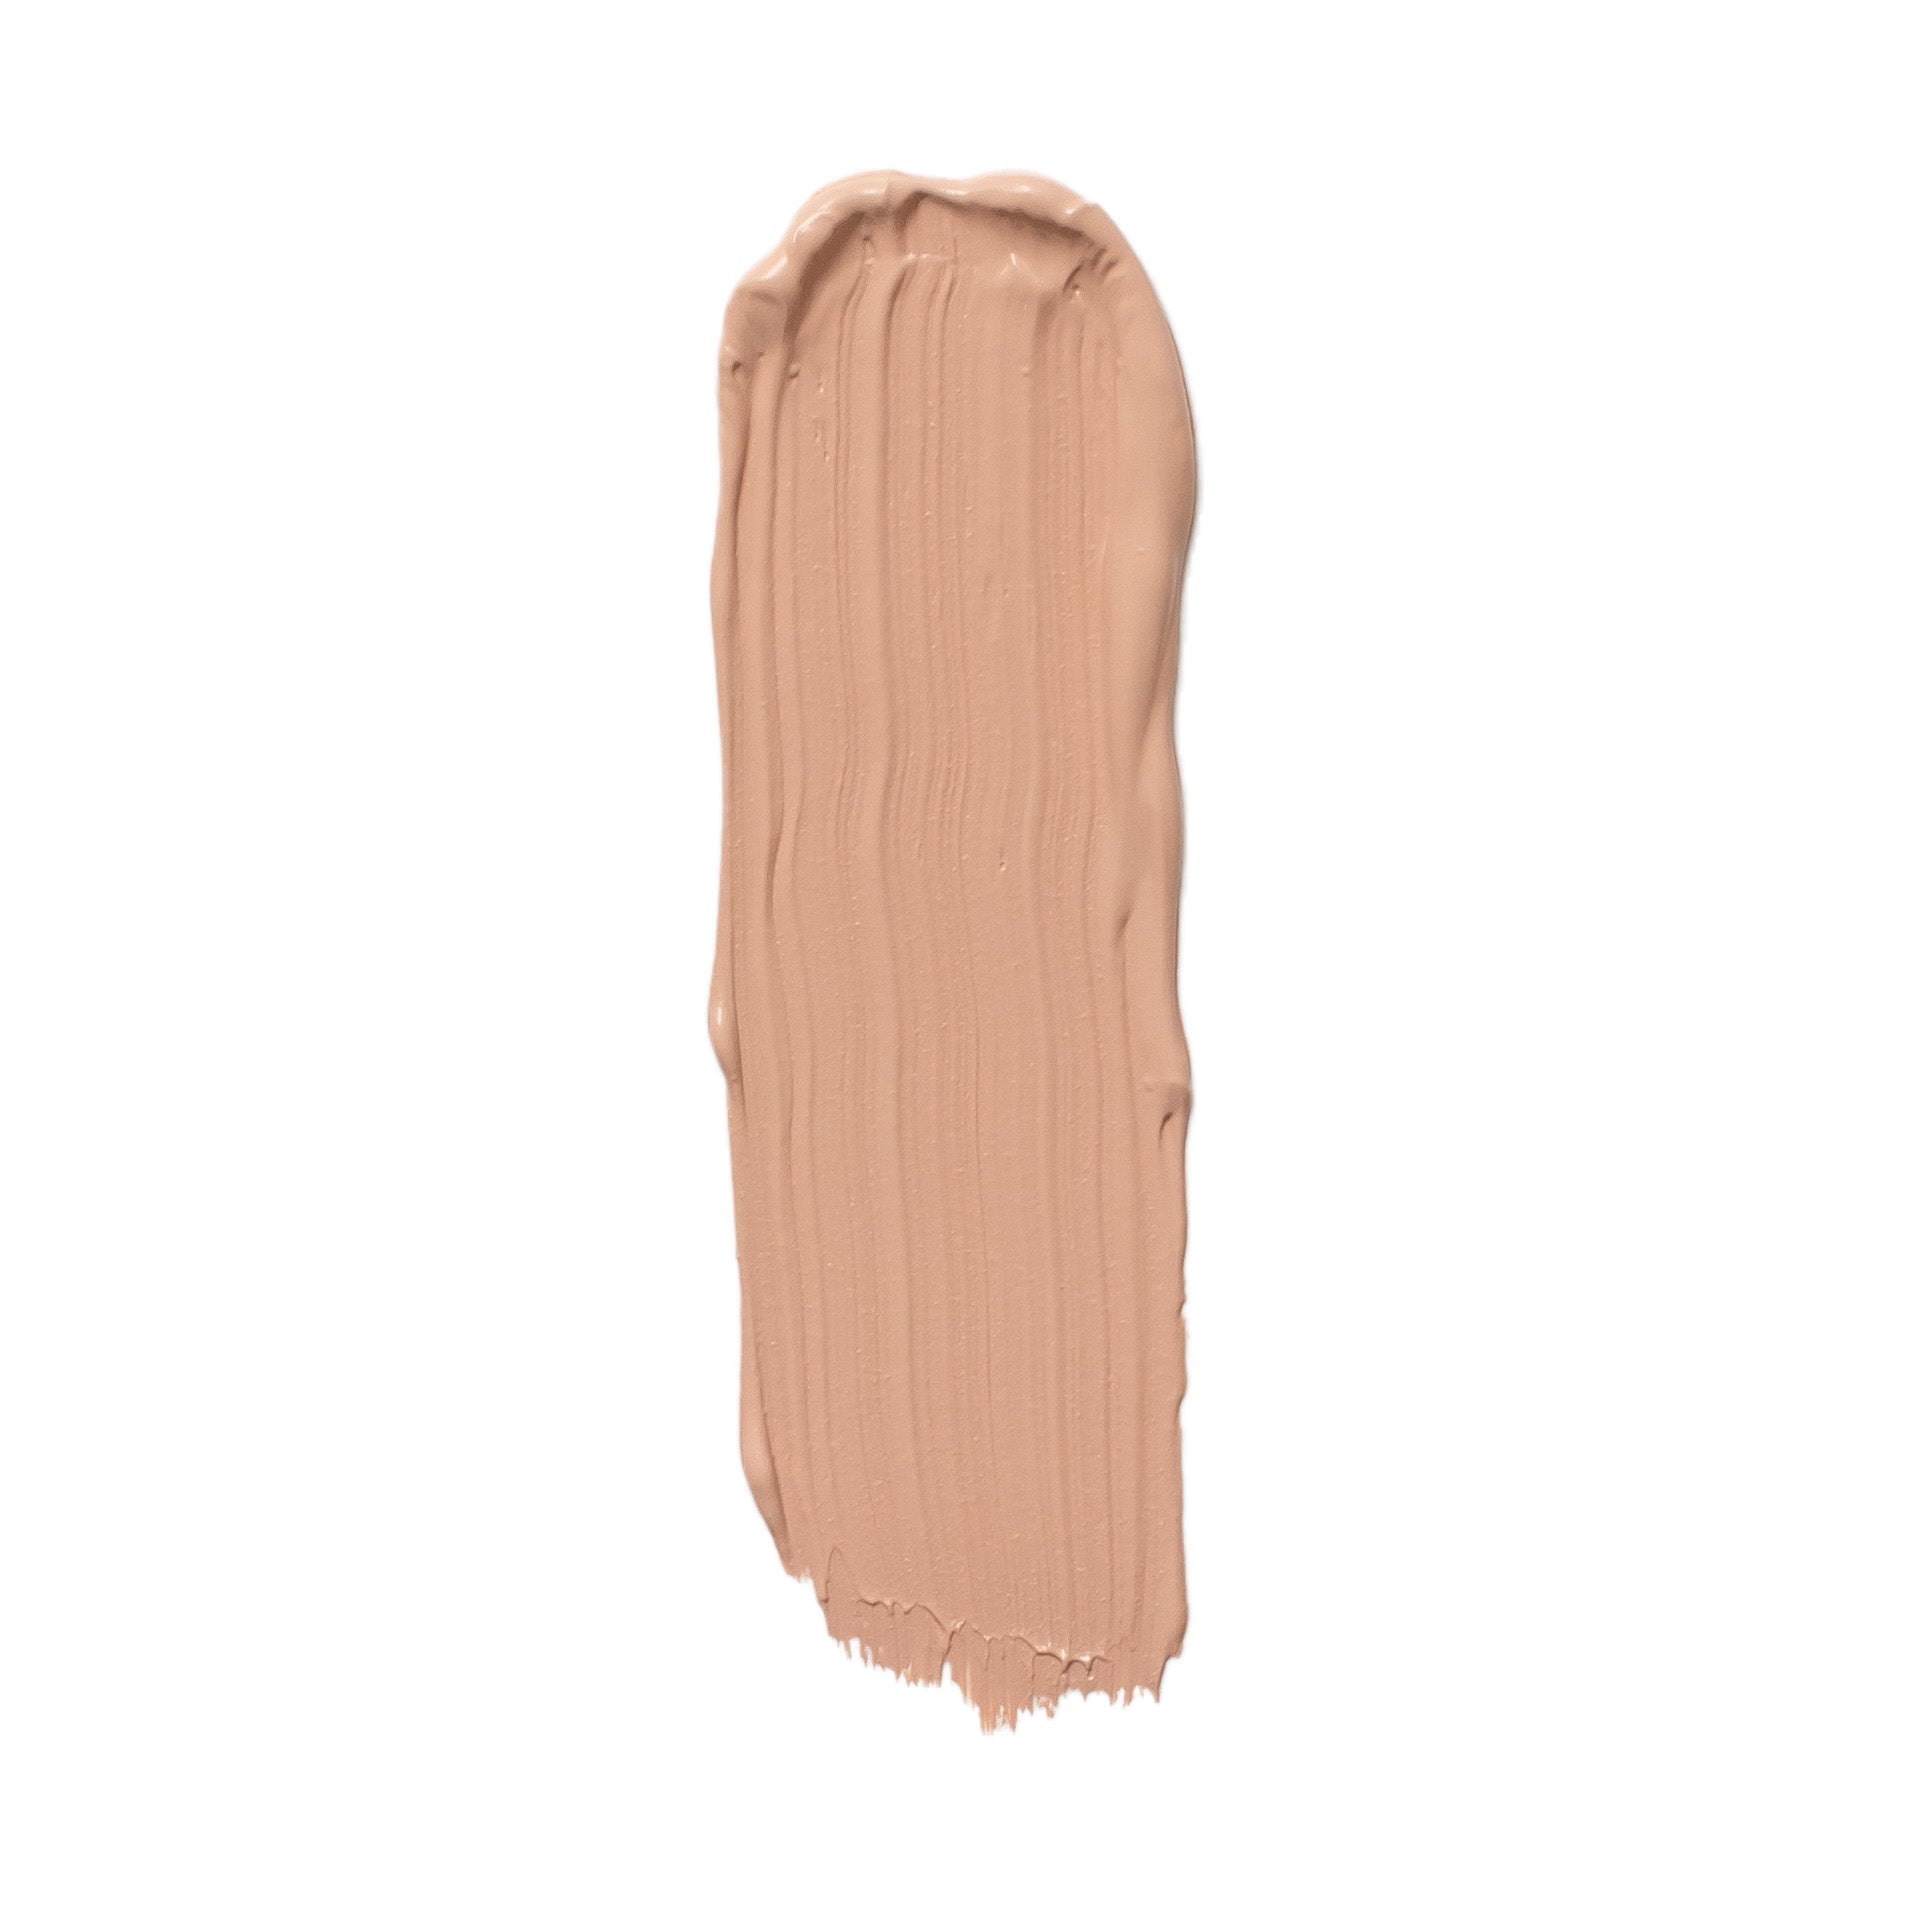 bPerfect CHROMA Cover Matte Foundation, C2 swatch